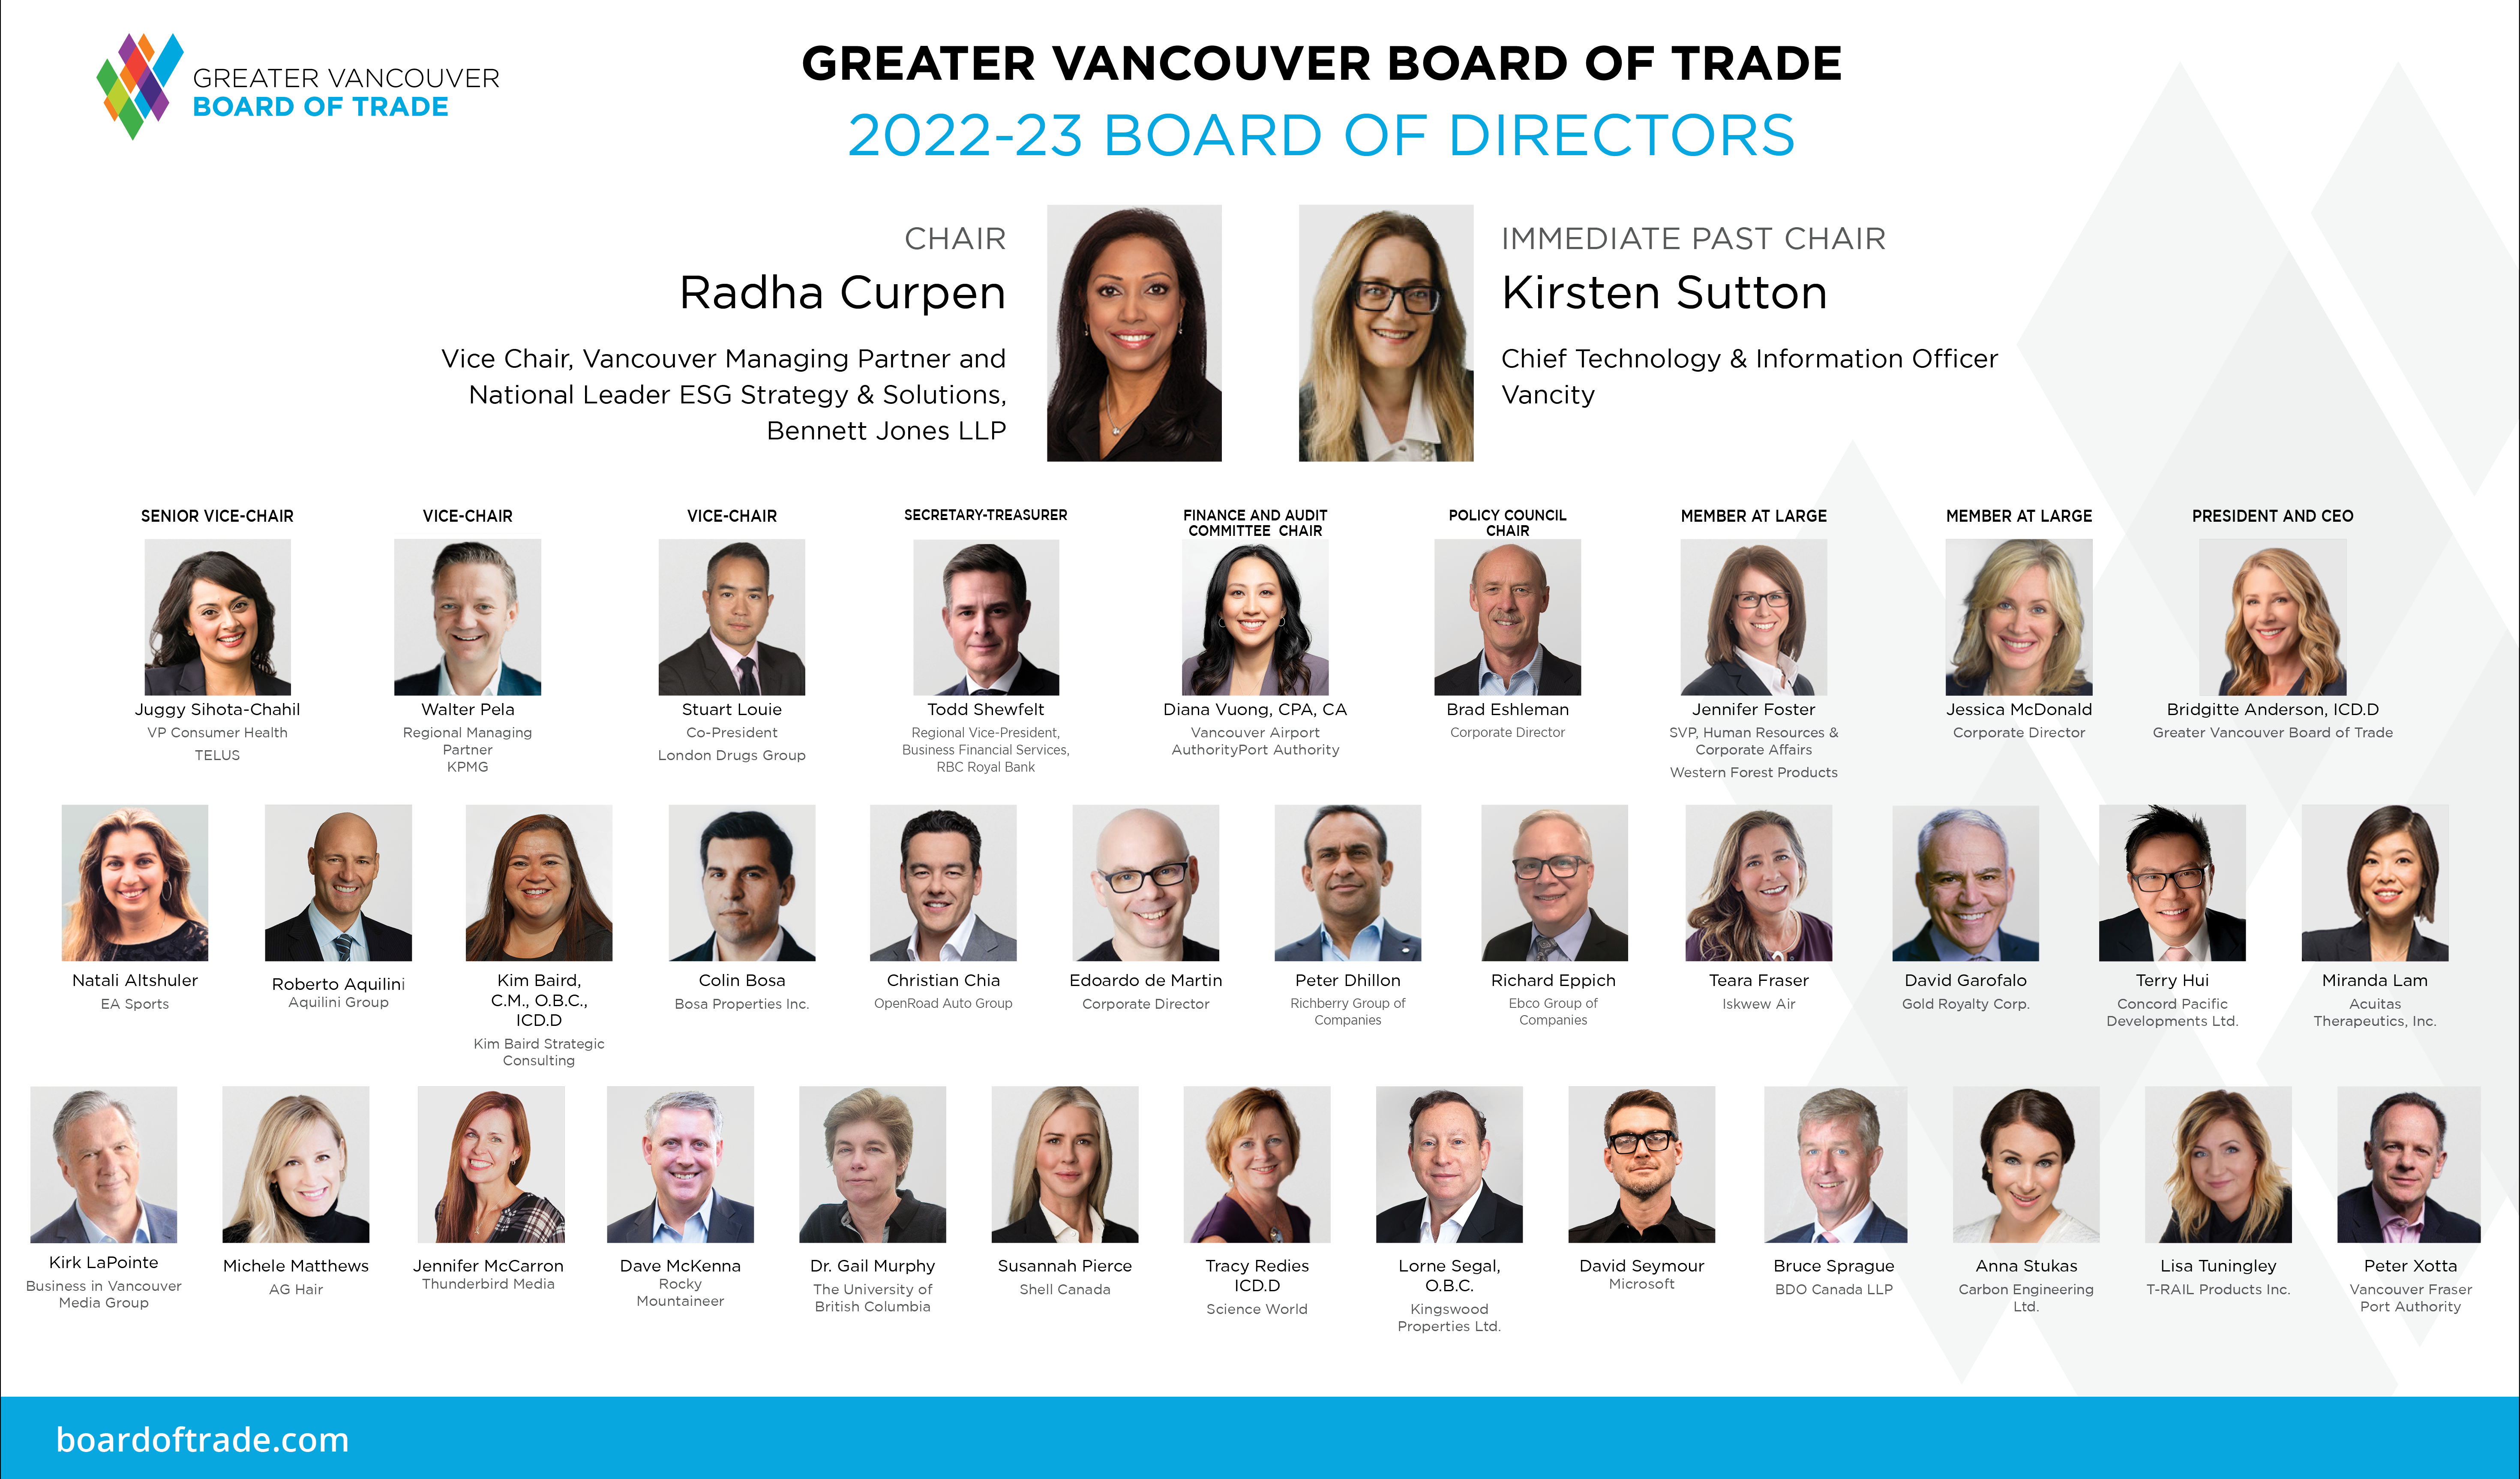 The Greater Vancouver Board of Trade Board of Directors.